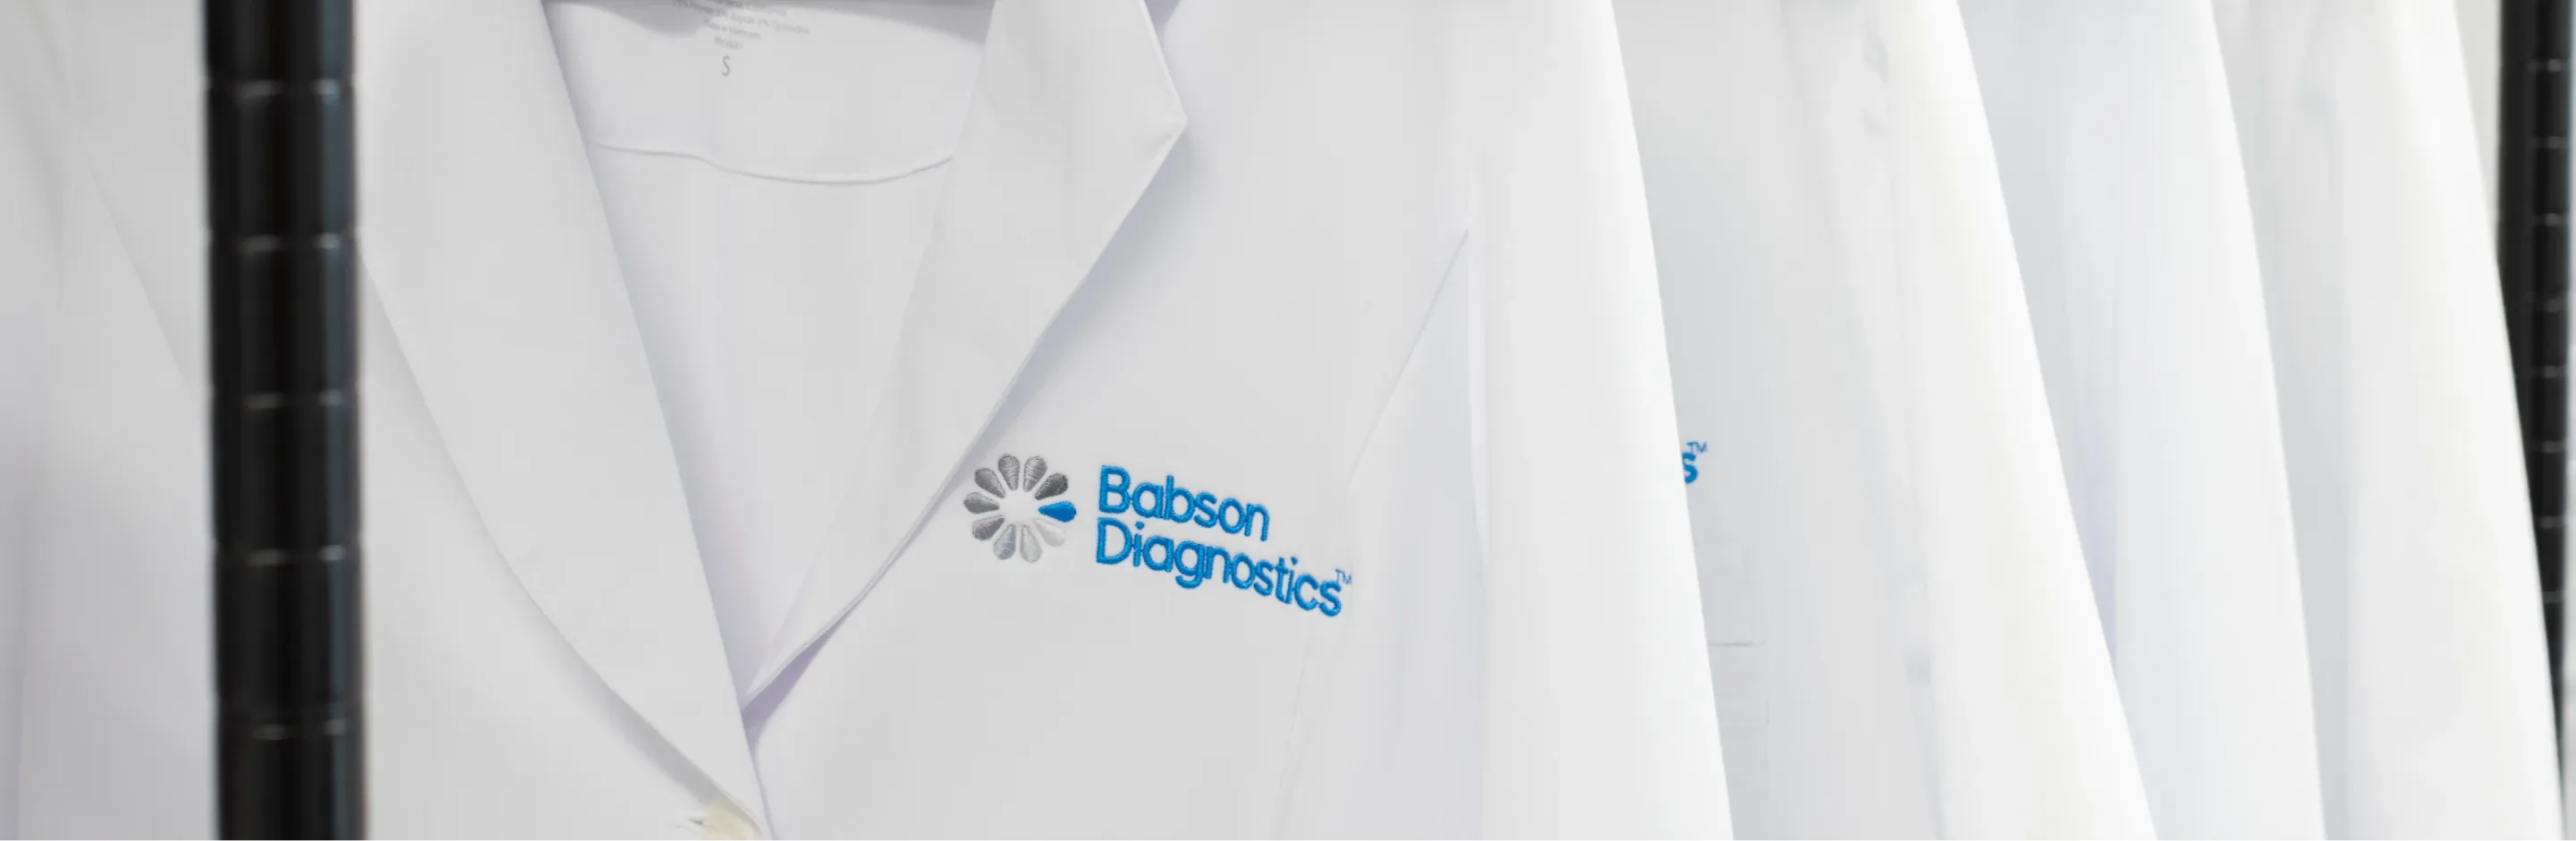 babson lab coat for people with careers in testing blood